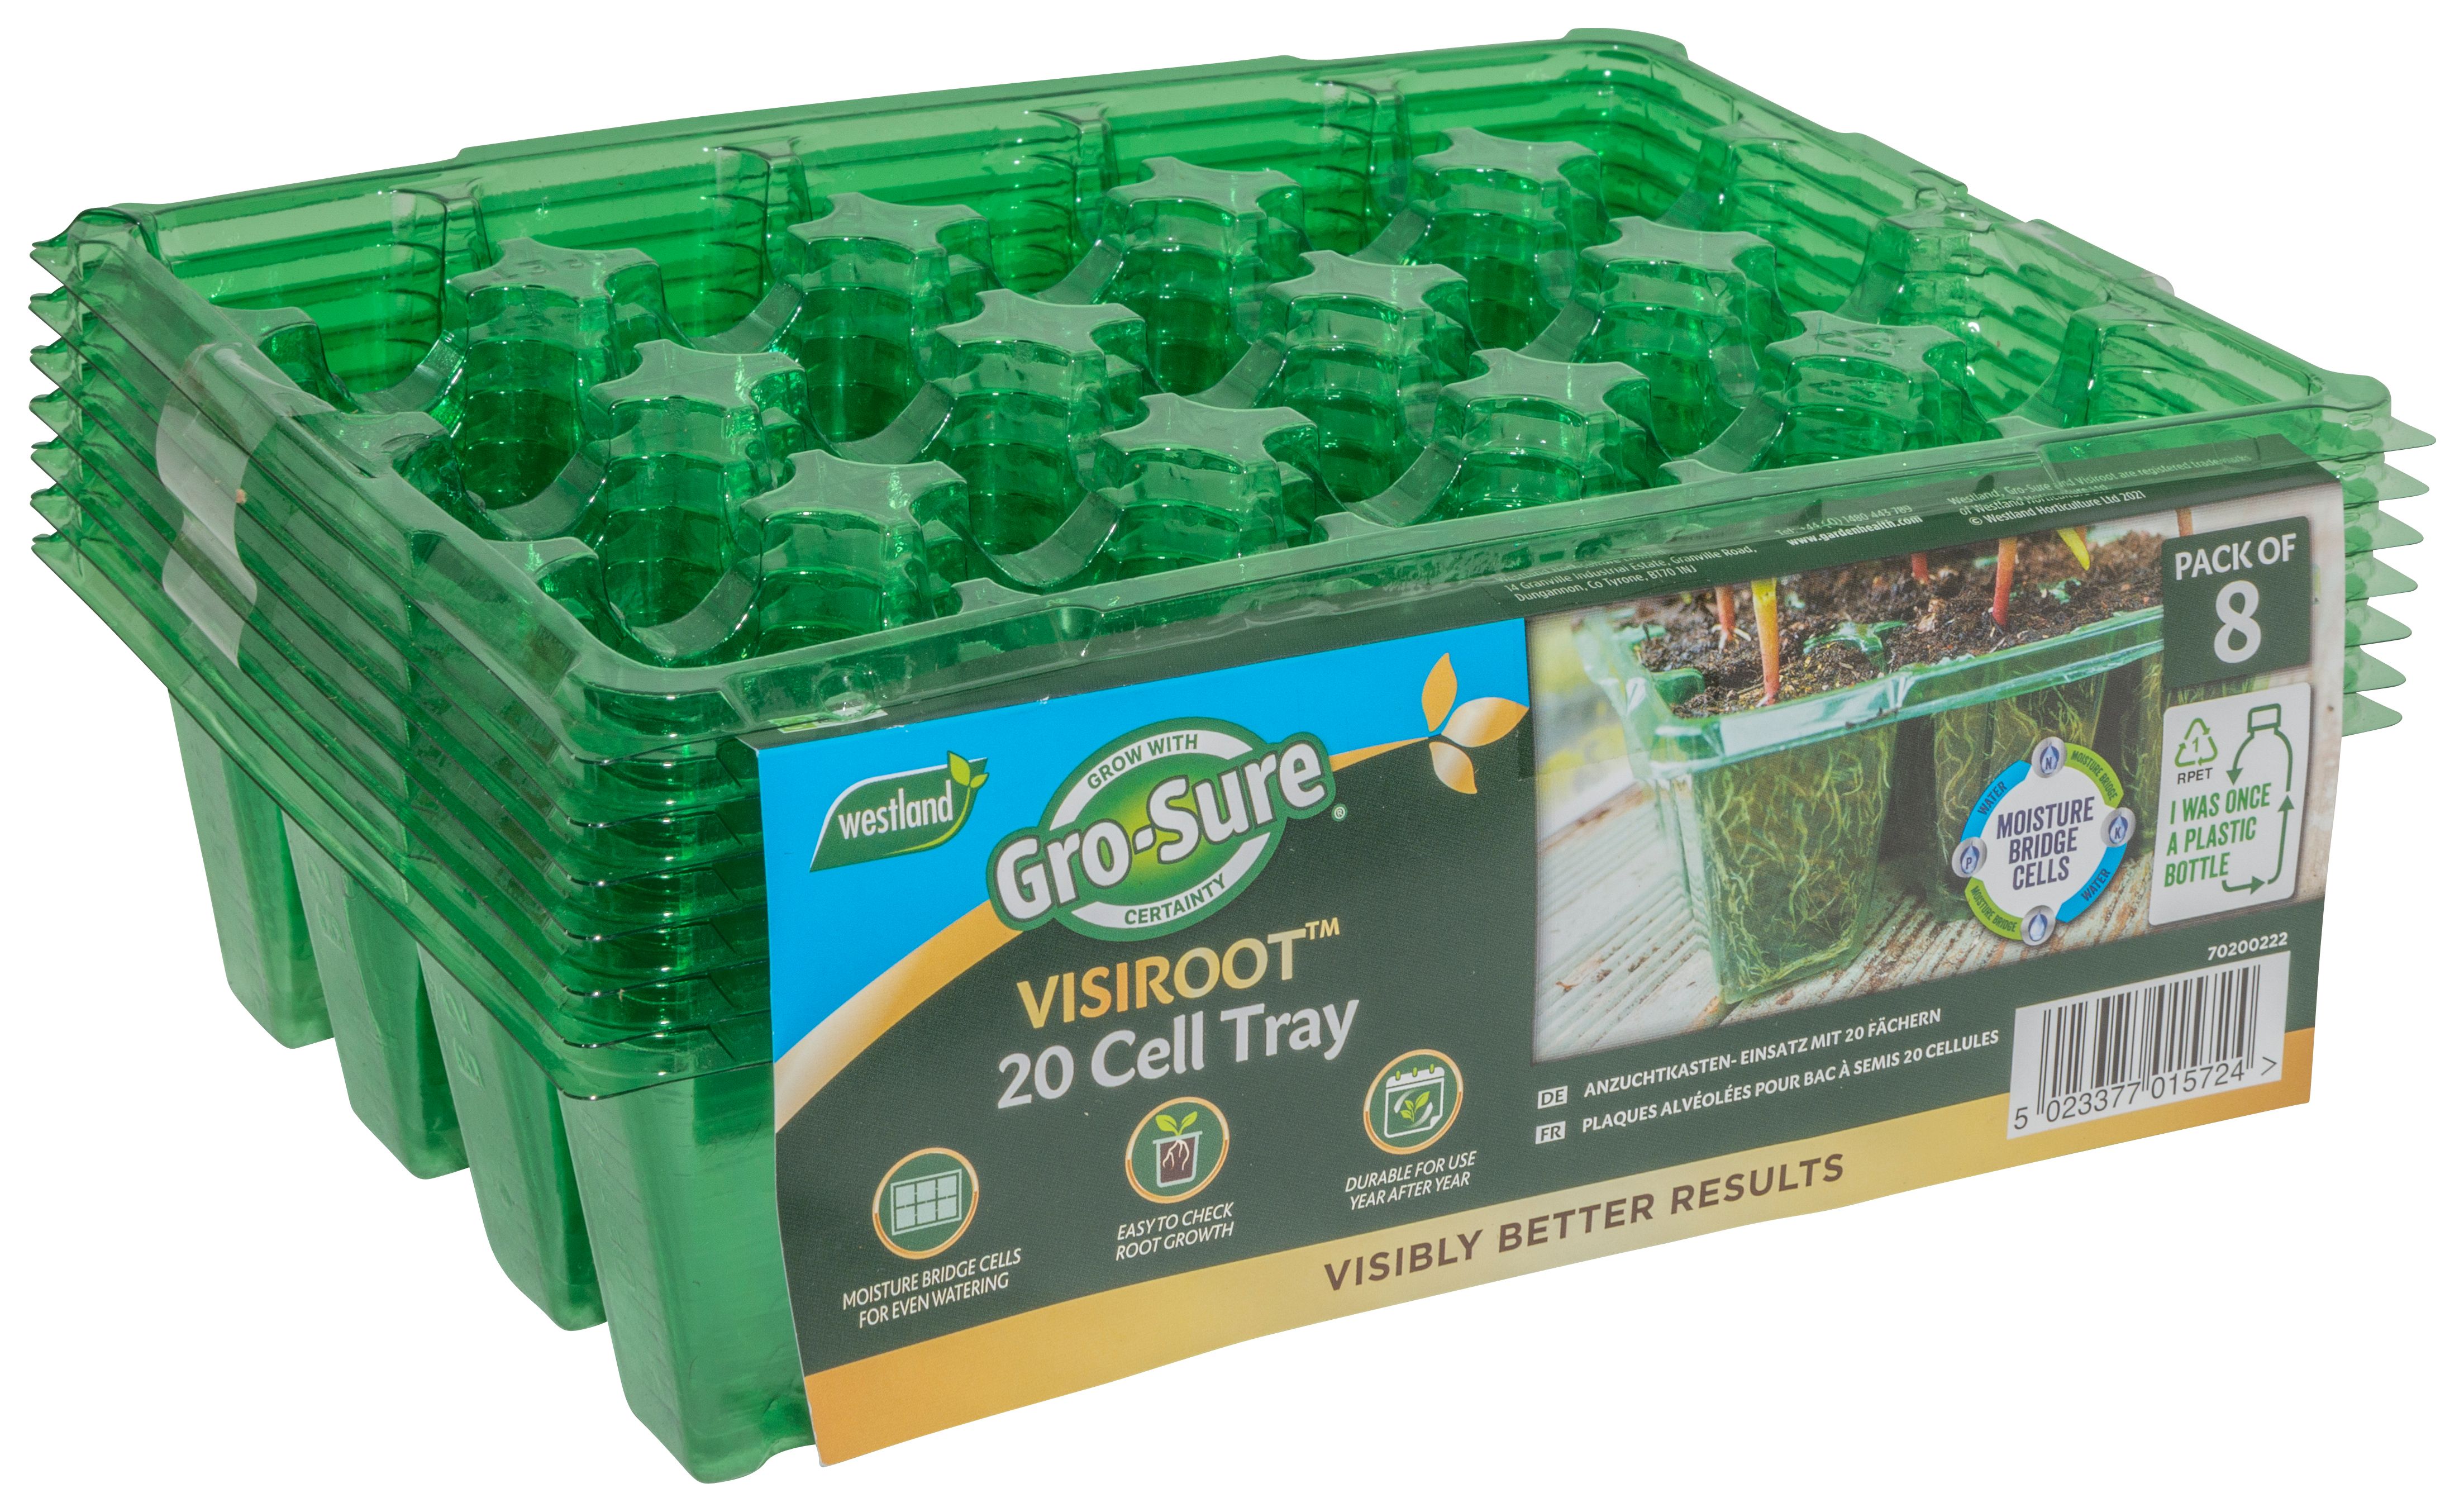 Gro-Sure Visiroot 20 Cell Tray - Pack of 8